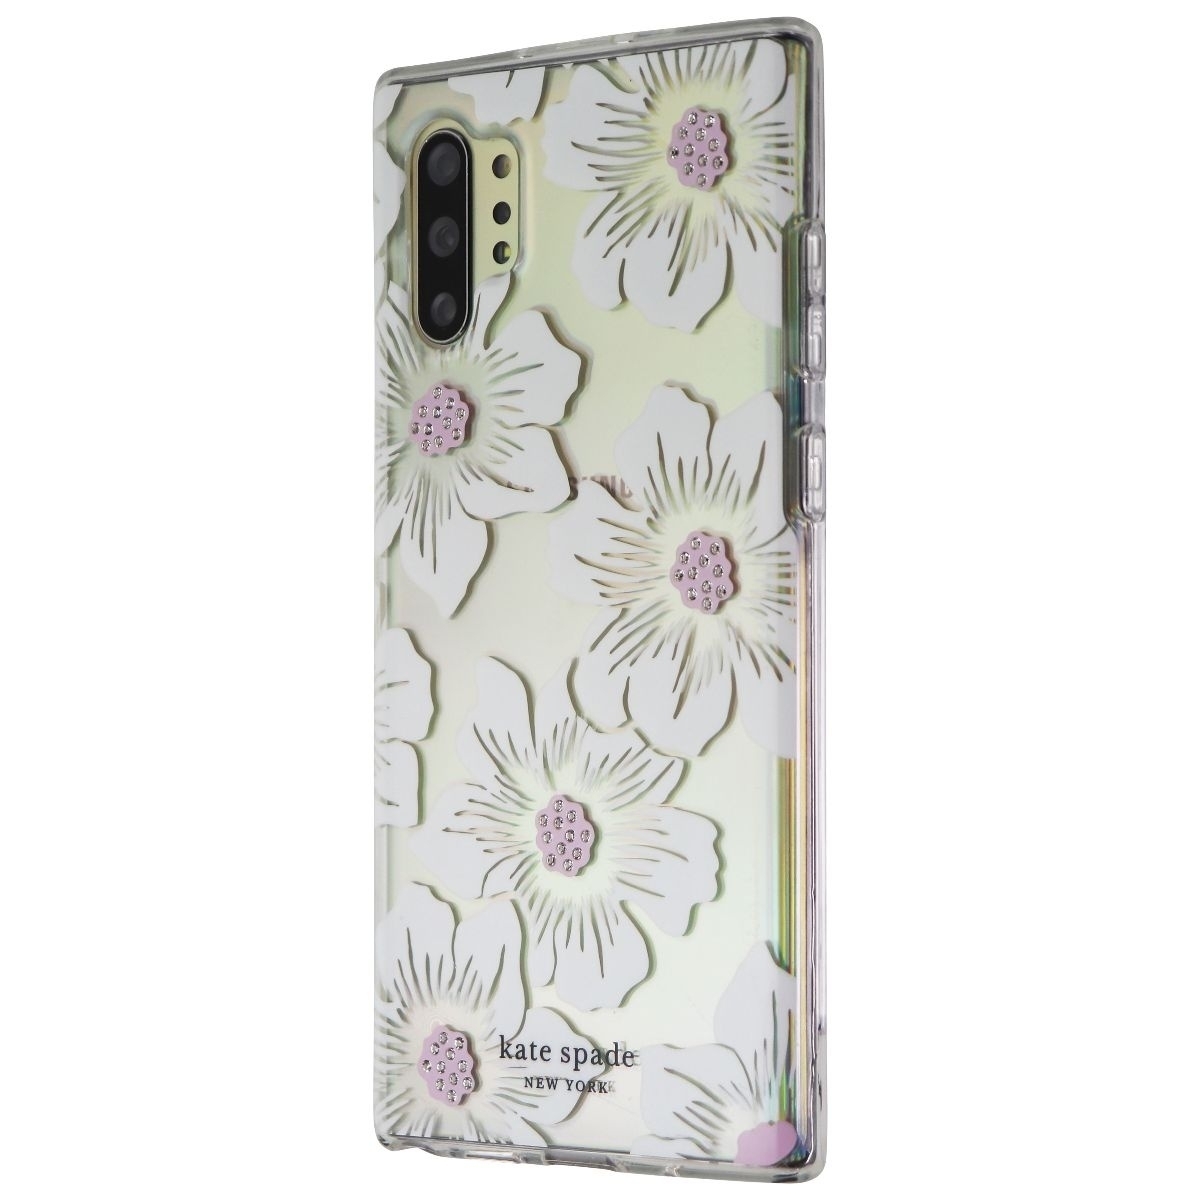 Kate Spade Hardshell Case For Galaxy Note10+ / Note10+ (5G) - HollyHock Floral